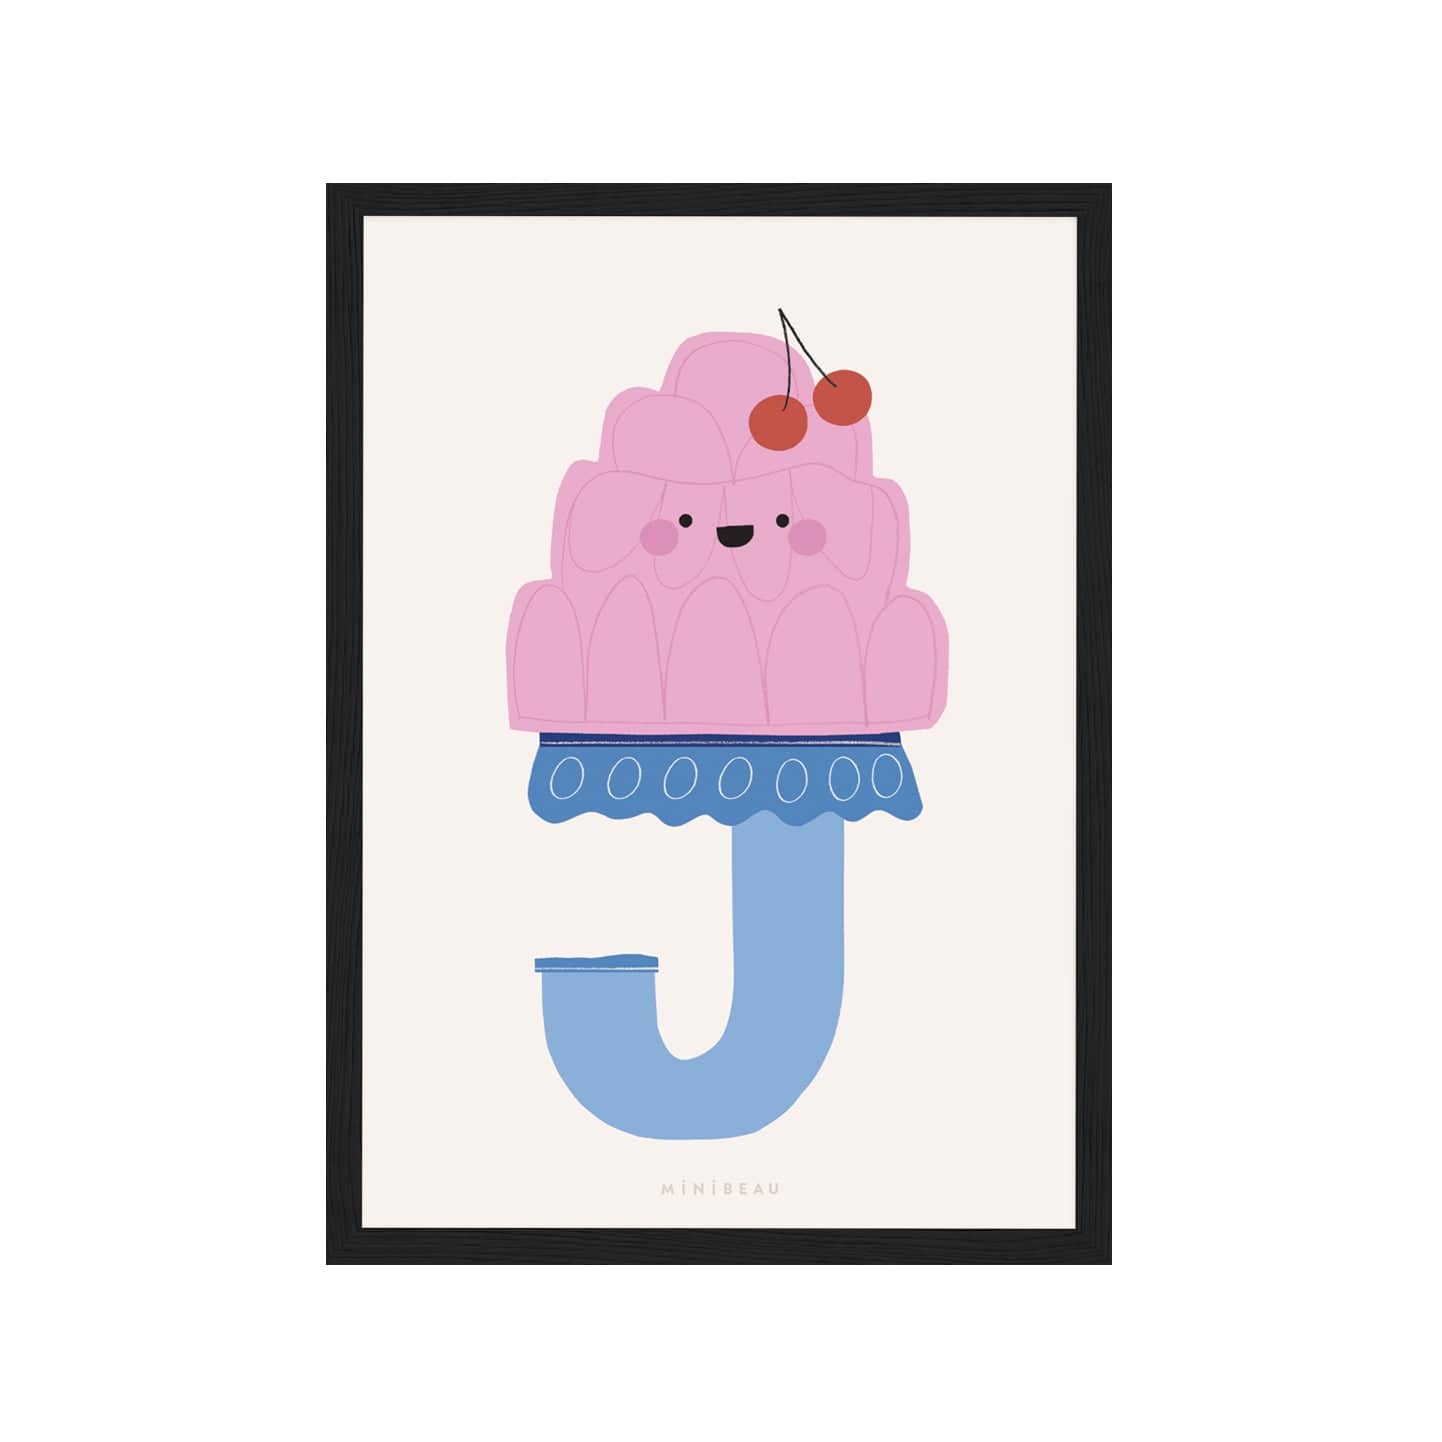 Art print in a black frame. Our Happy Alphabet 'J' Art Print shows a smiling pink moulded jelly on a blue stand in the shape of a J, with cherries on top of the Jelly on a neutral background.